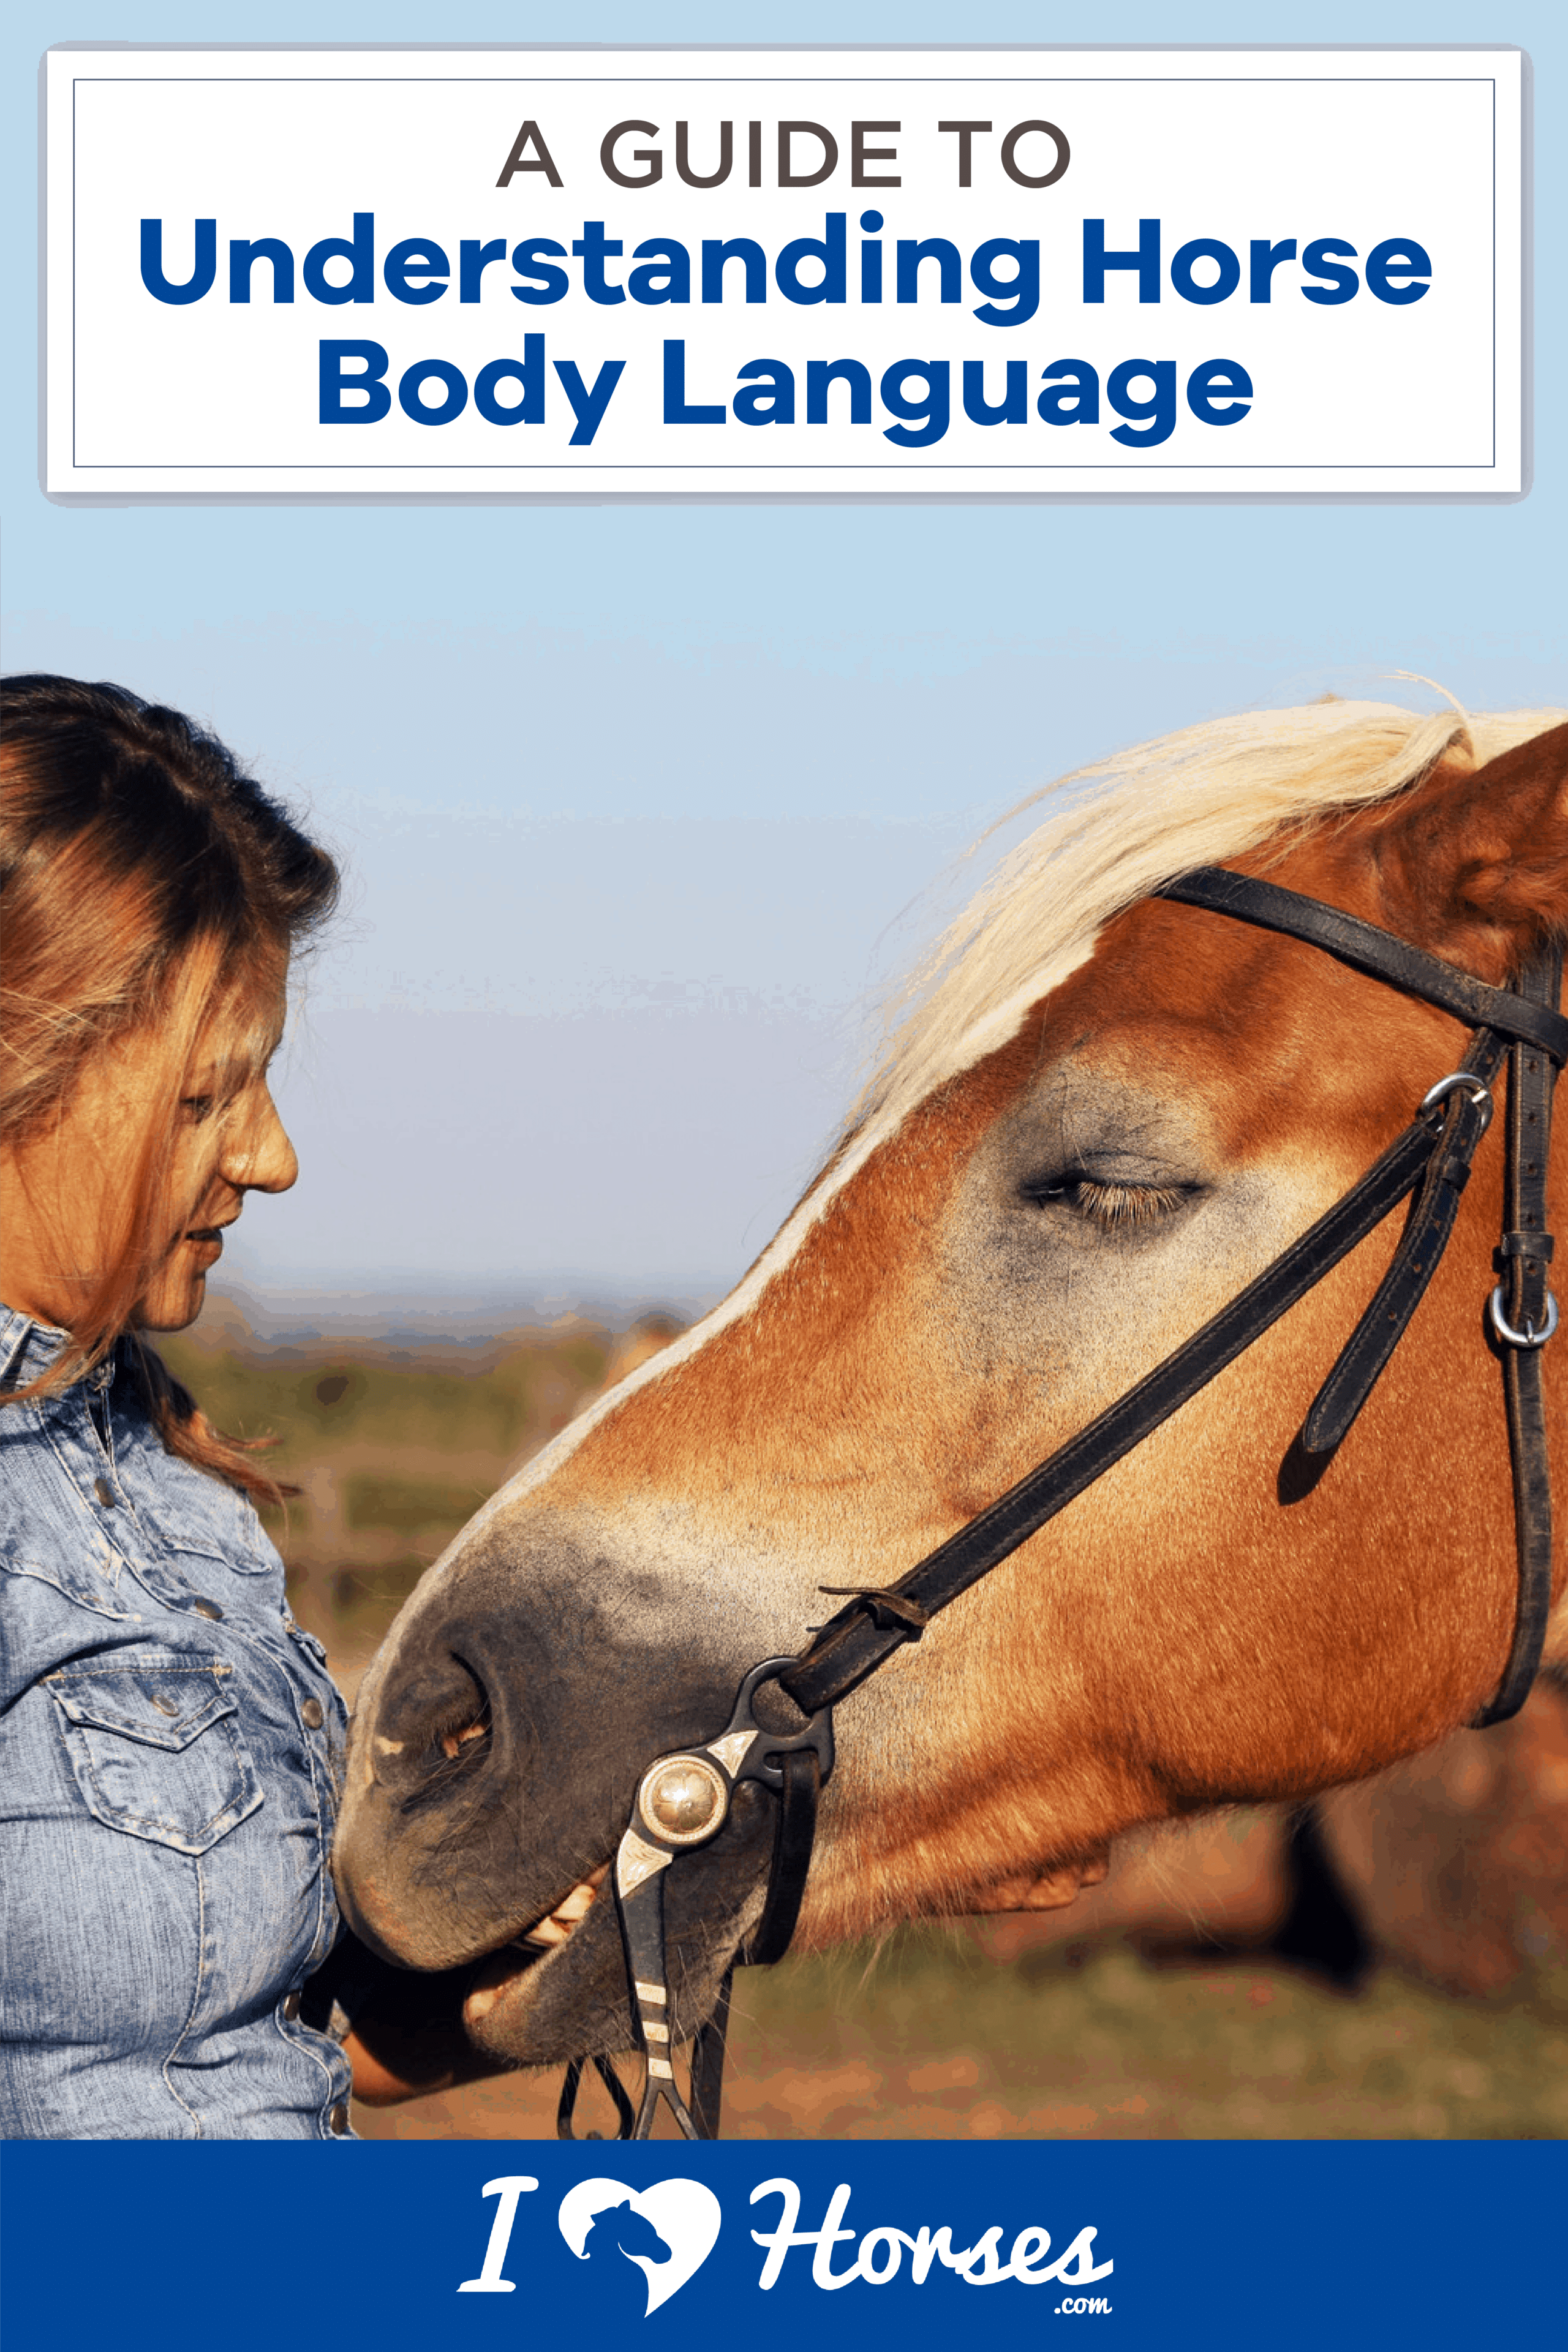 horse body language, horse and woman